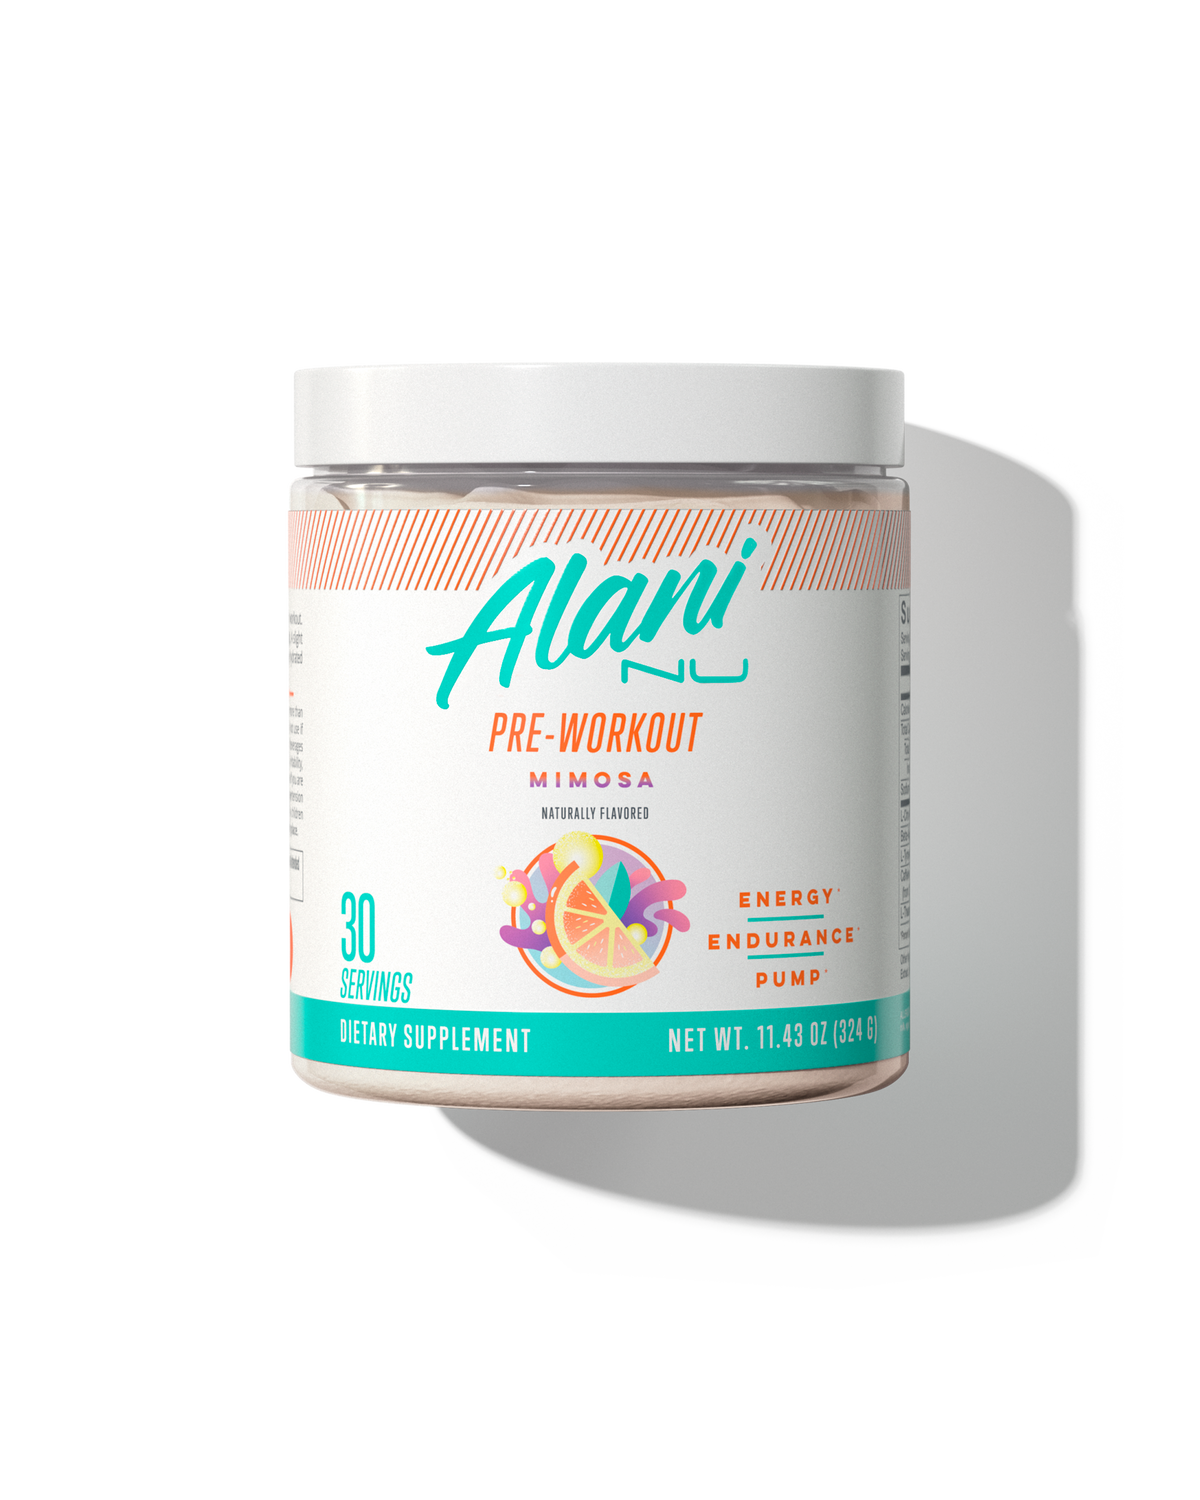 A 30 serving container of Pre-workout in Mimosa flavor. 